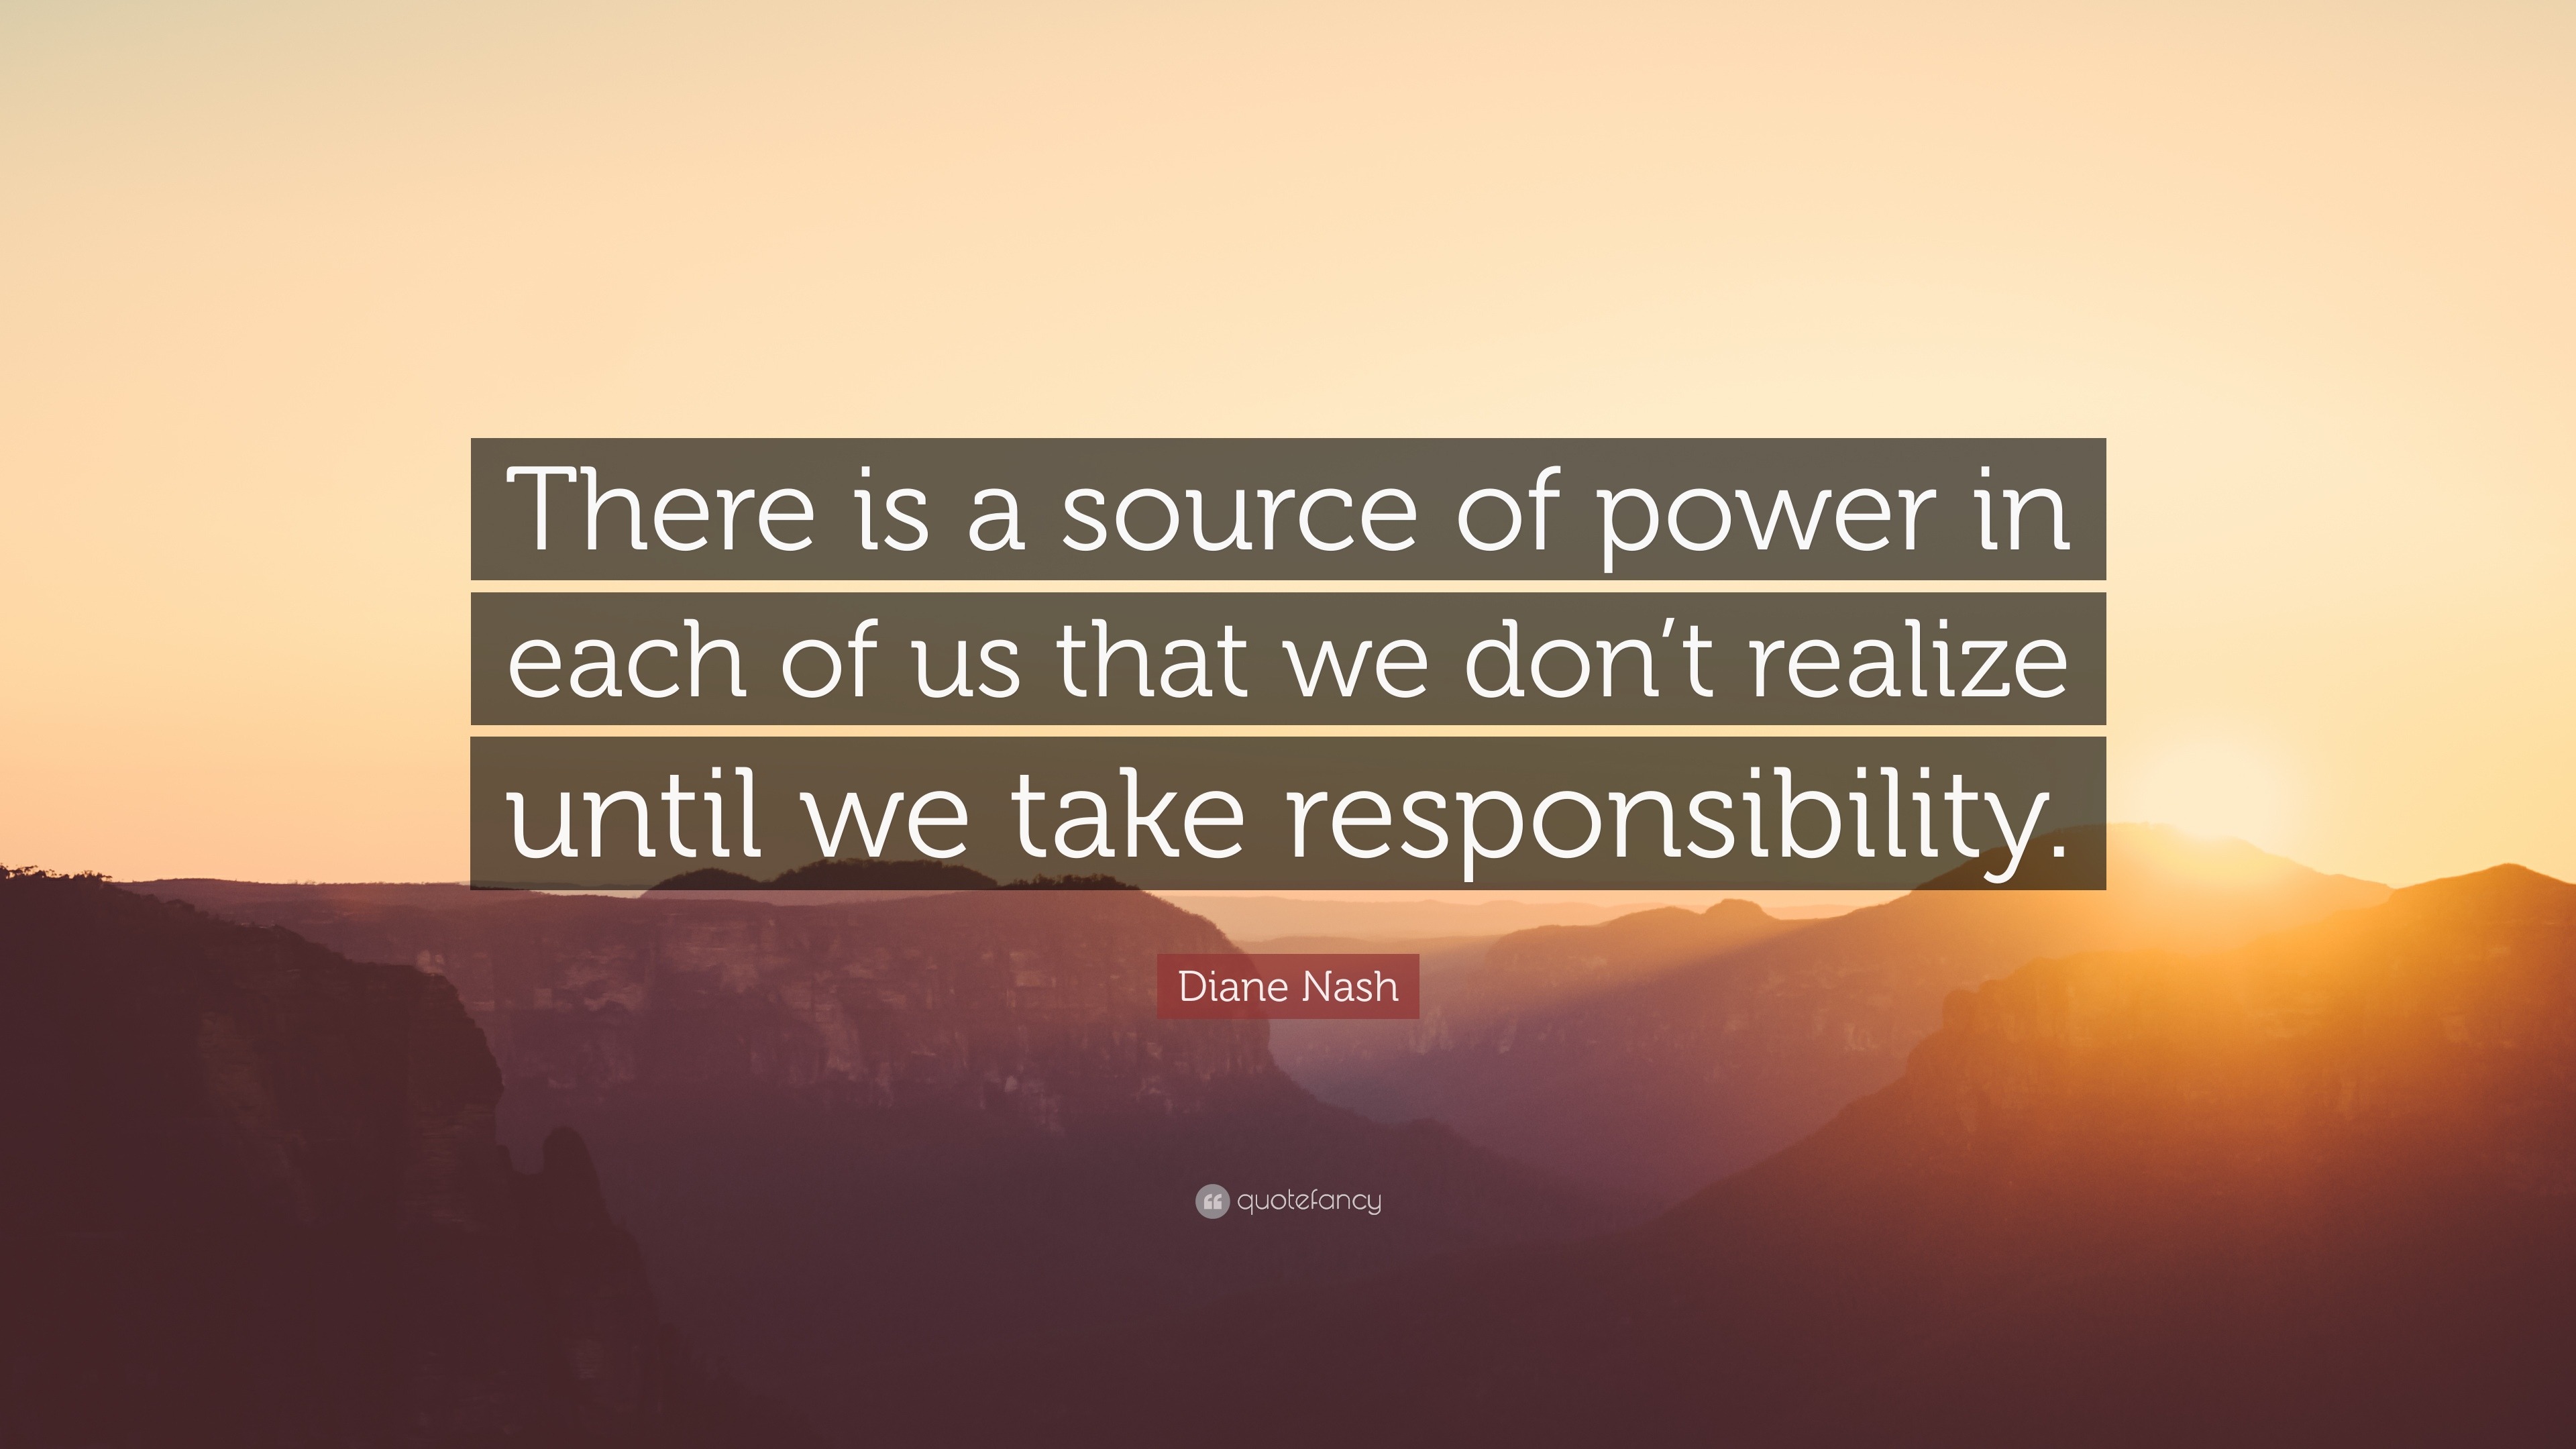 There is a source of power in each of us that we don’t realize until we tak...